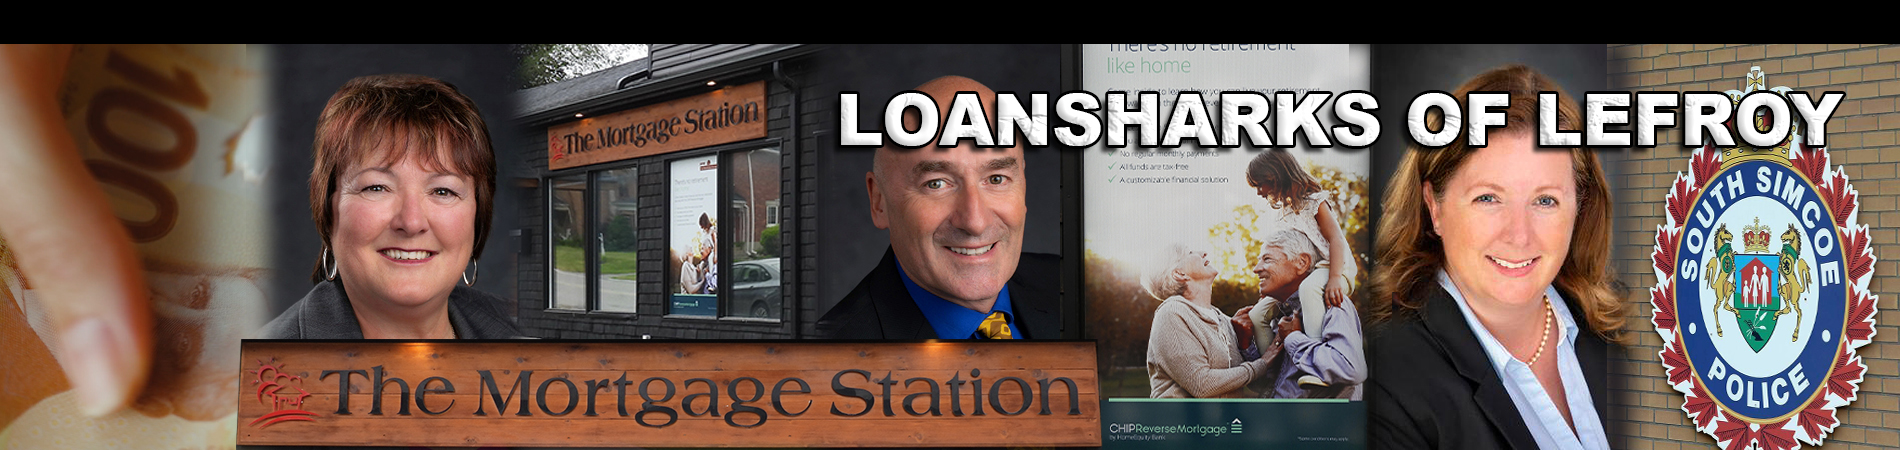 Verico the Mortgage Station, Loan Sharks In Lefroy